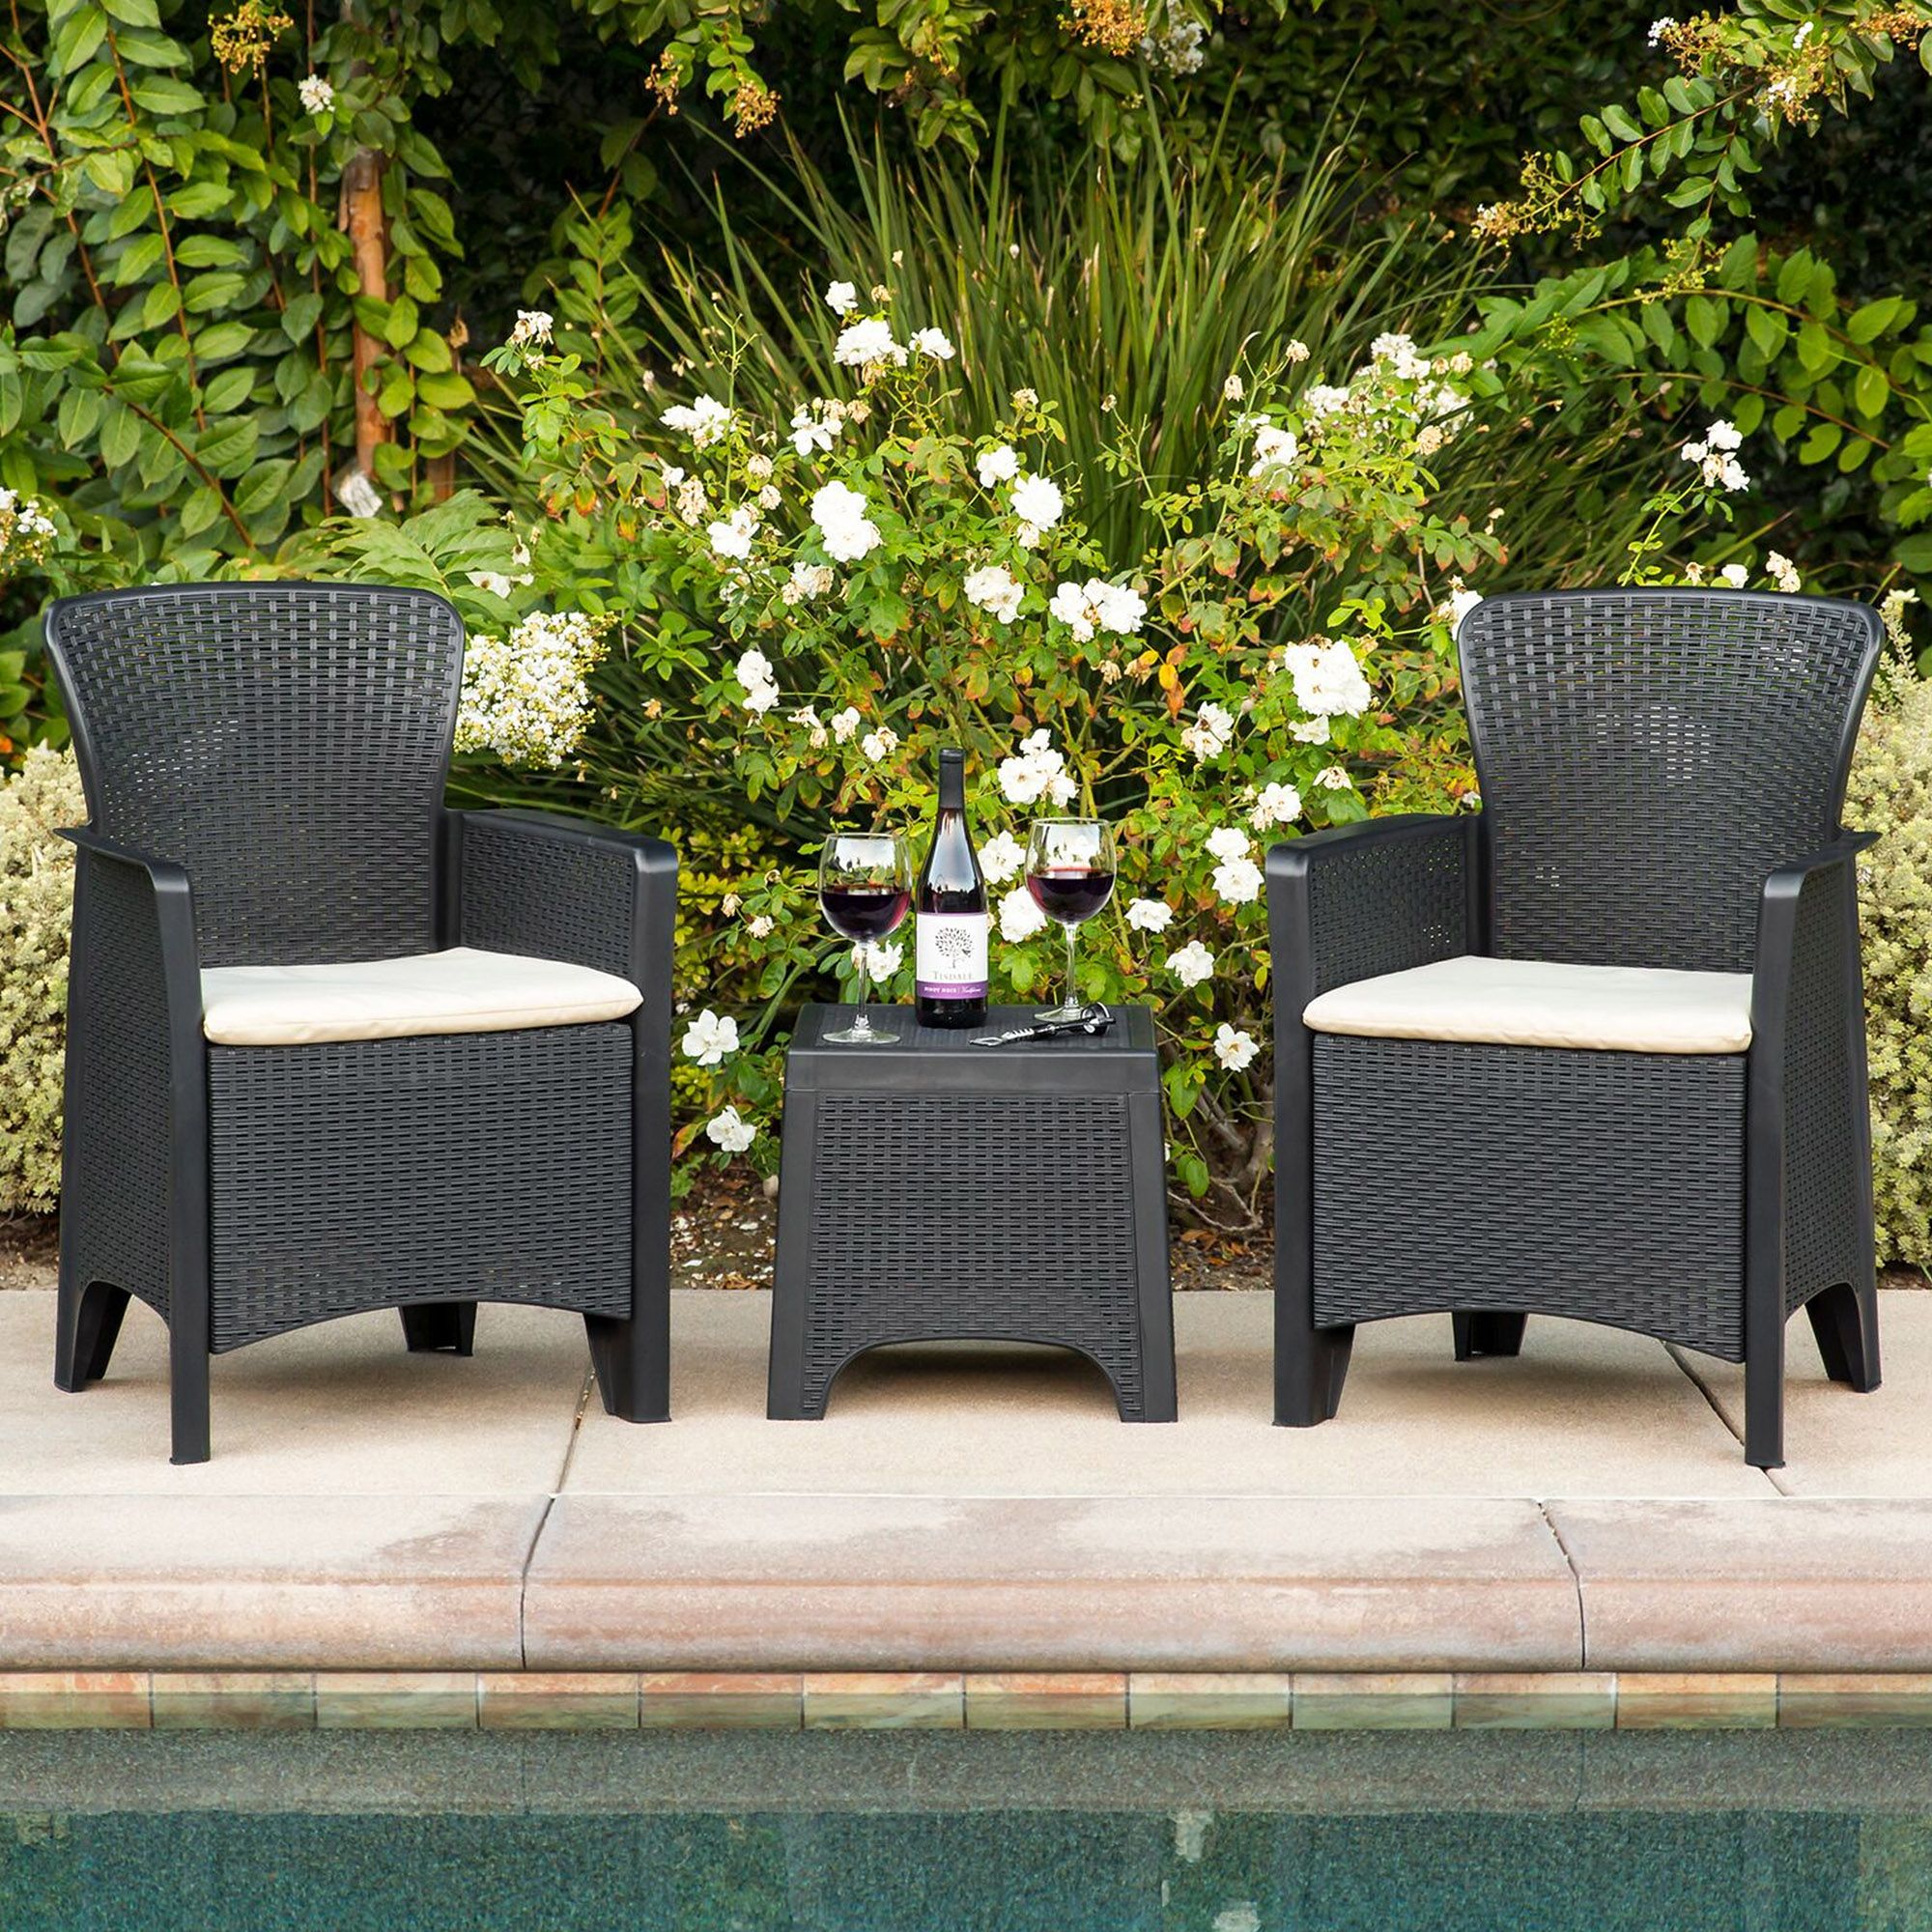 Best Choice Products 3 Piece Weather Resistant Resin Patio Bistro Throughout 3 Piece Patio Bistro Sets (View 14 of 15)